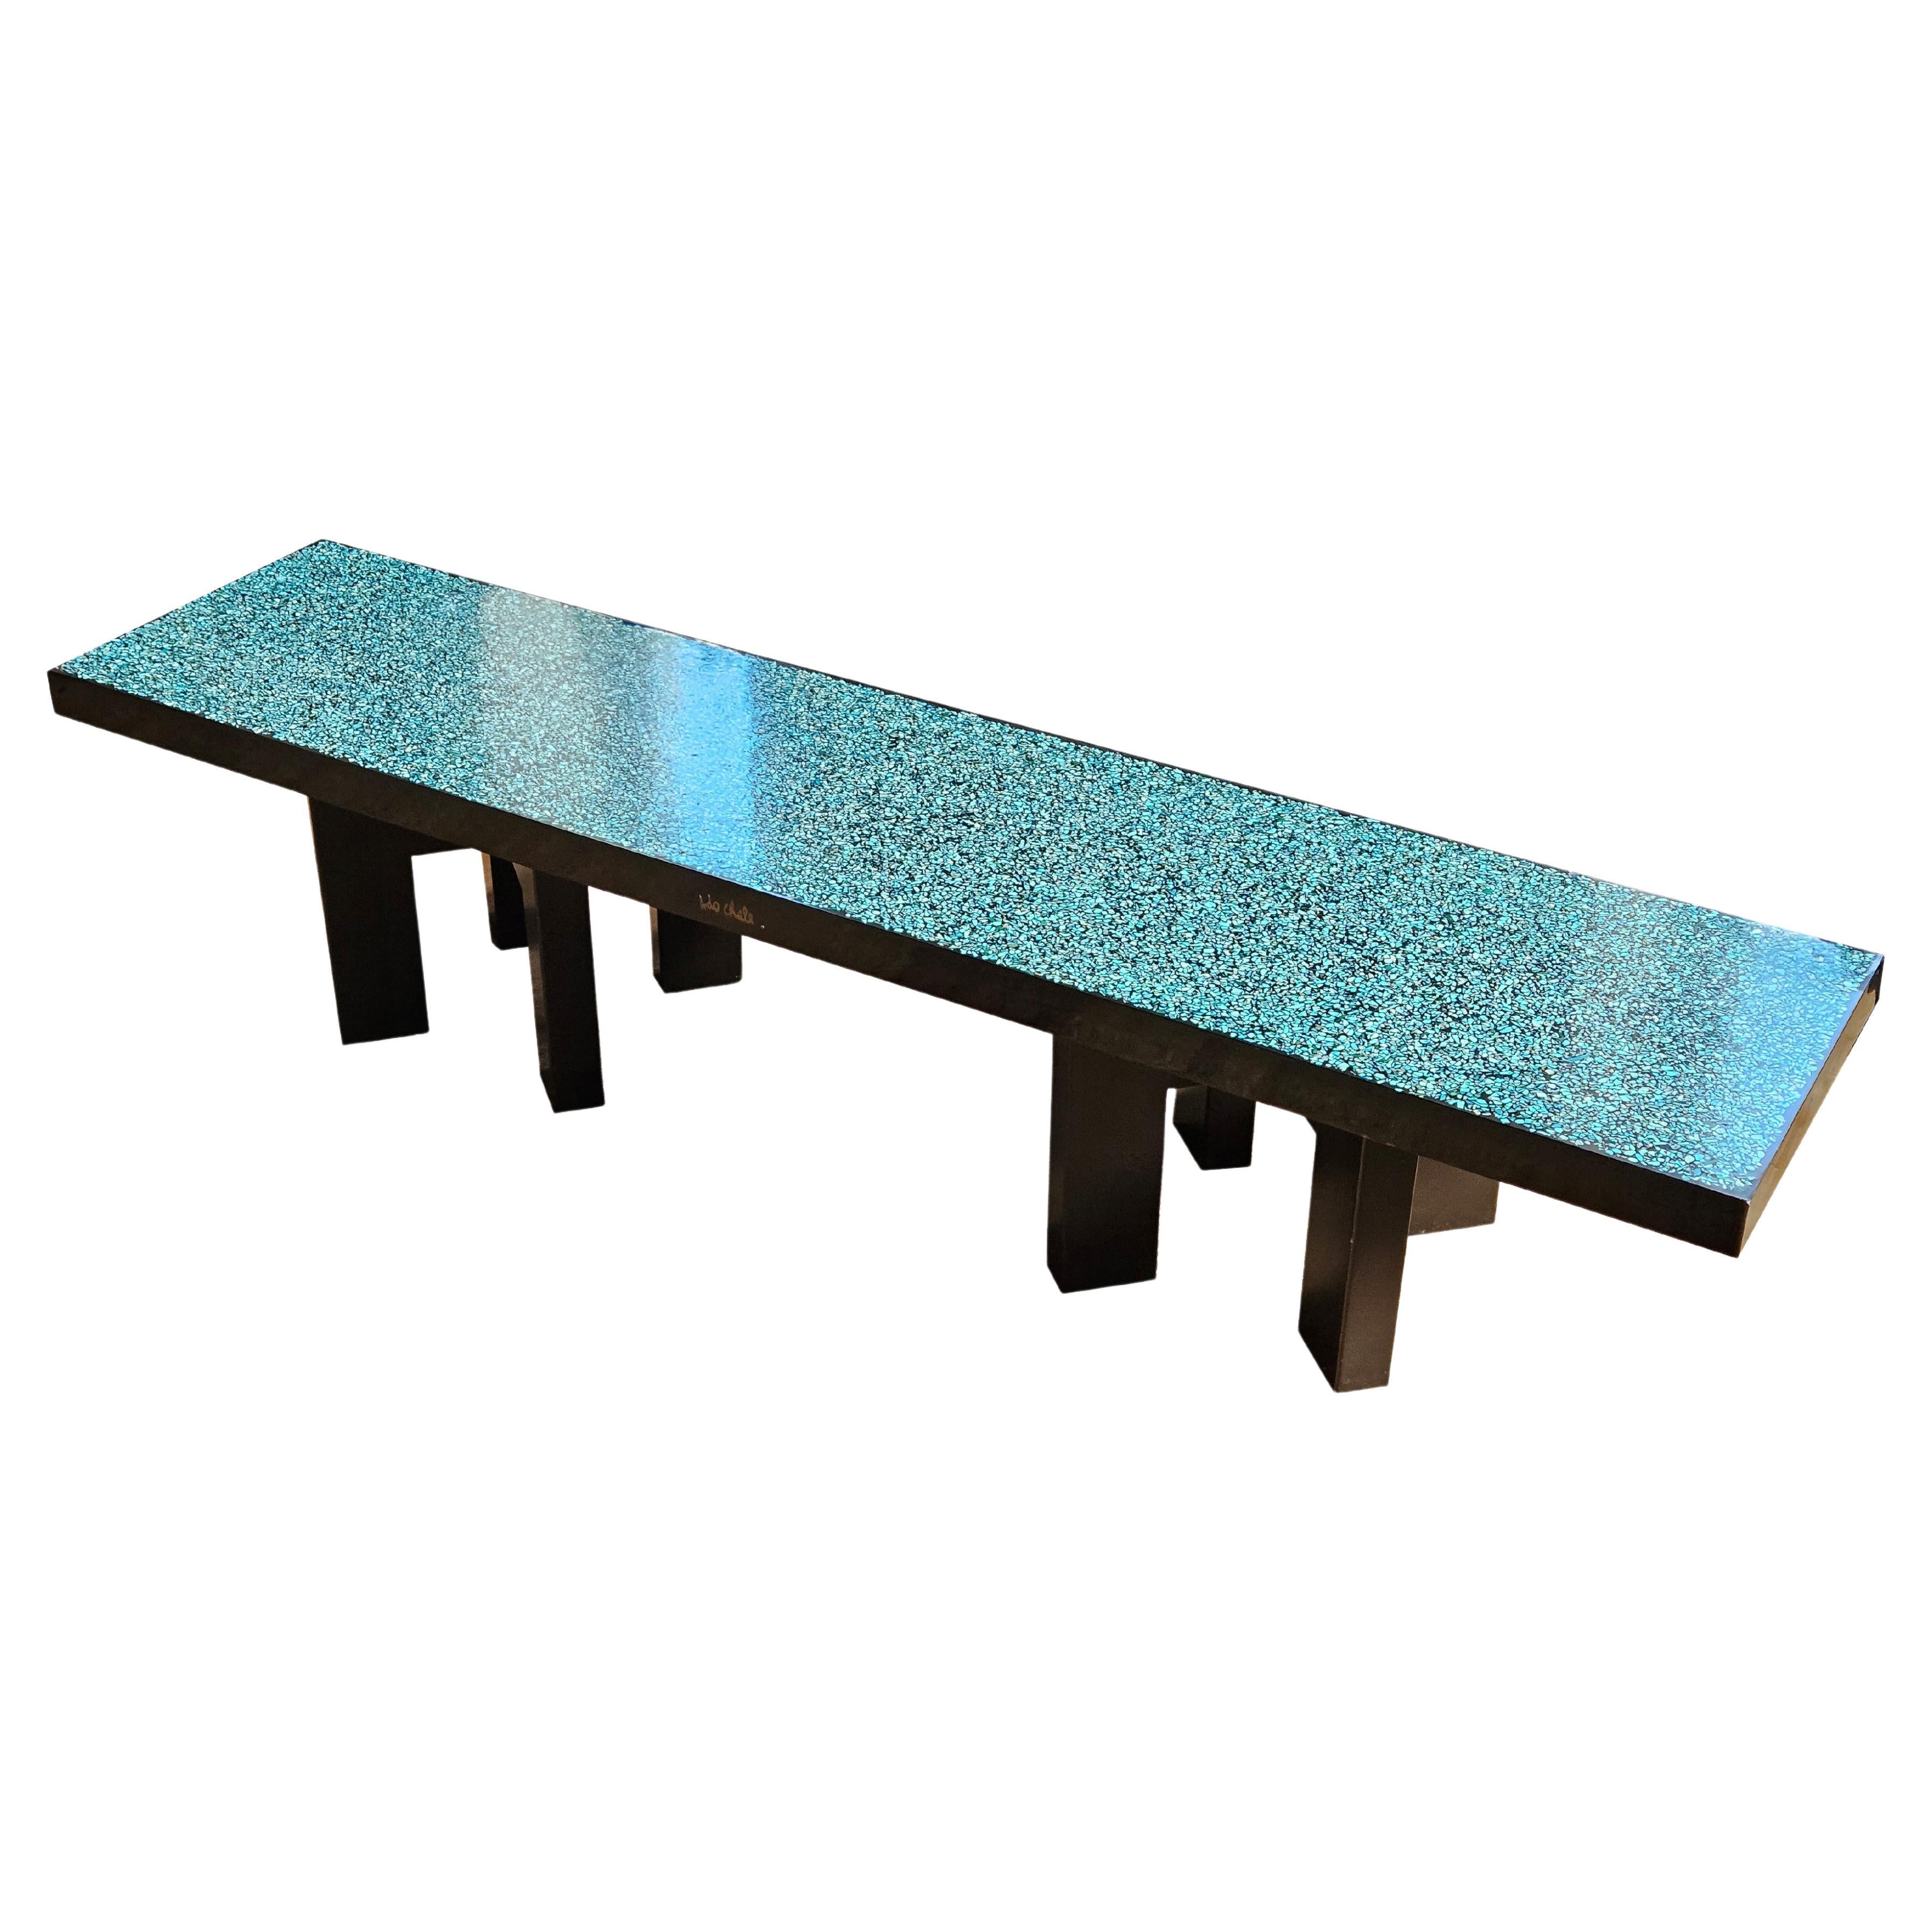 20th Century Turquoise mosaic and lacquer table by Ado Châle